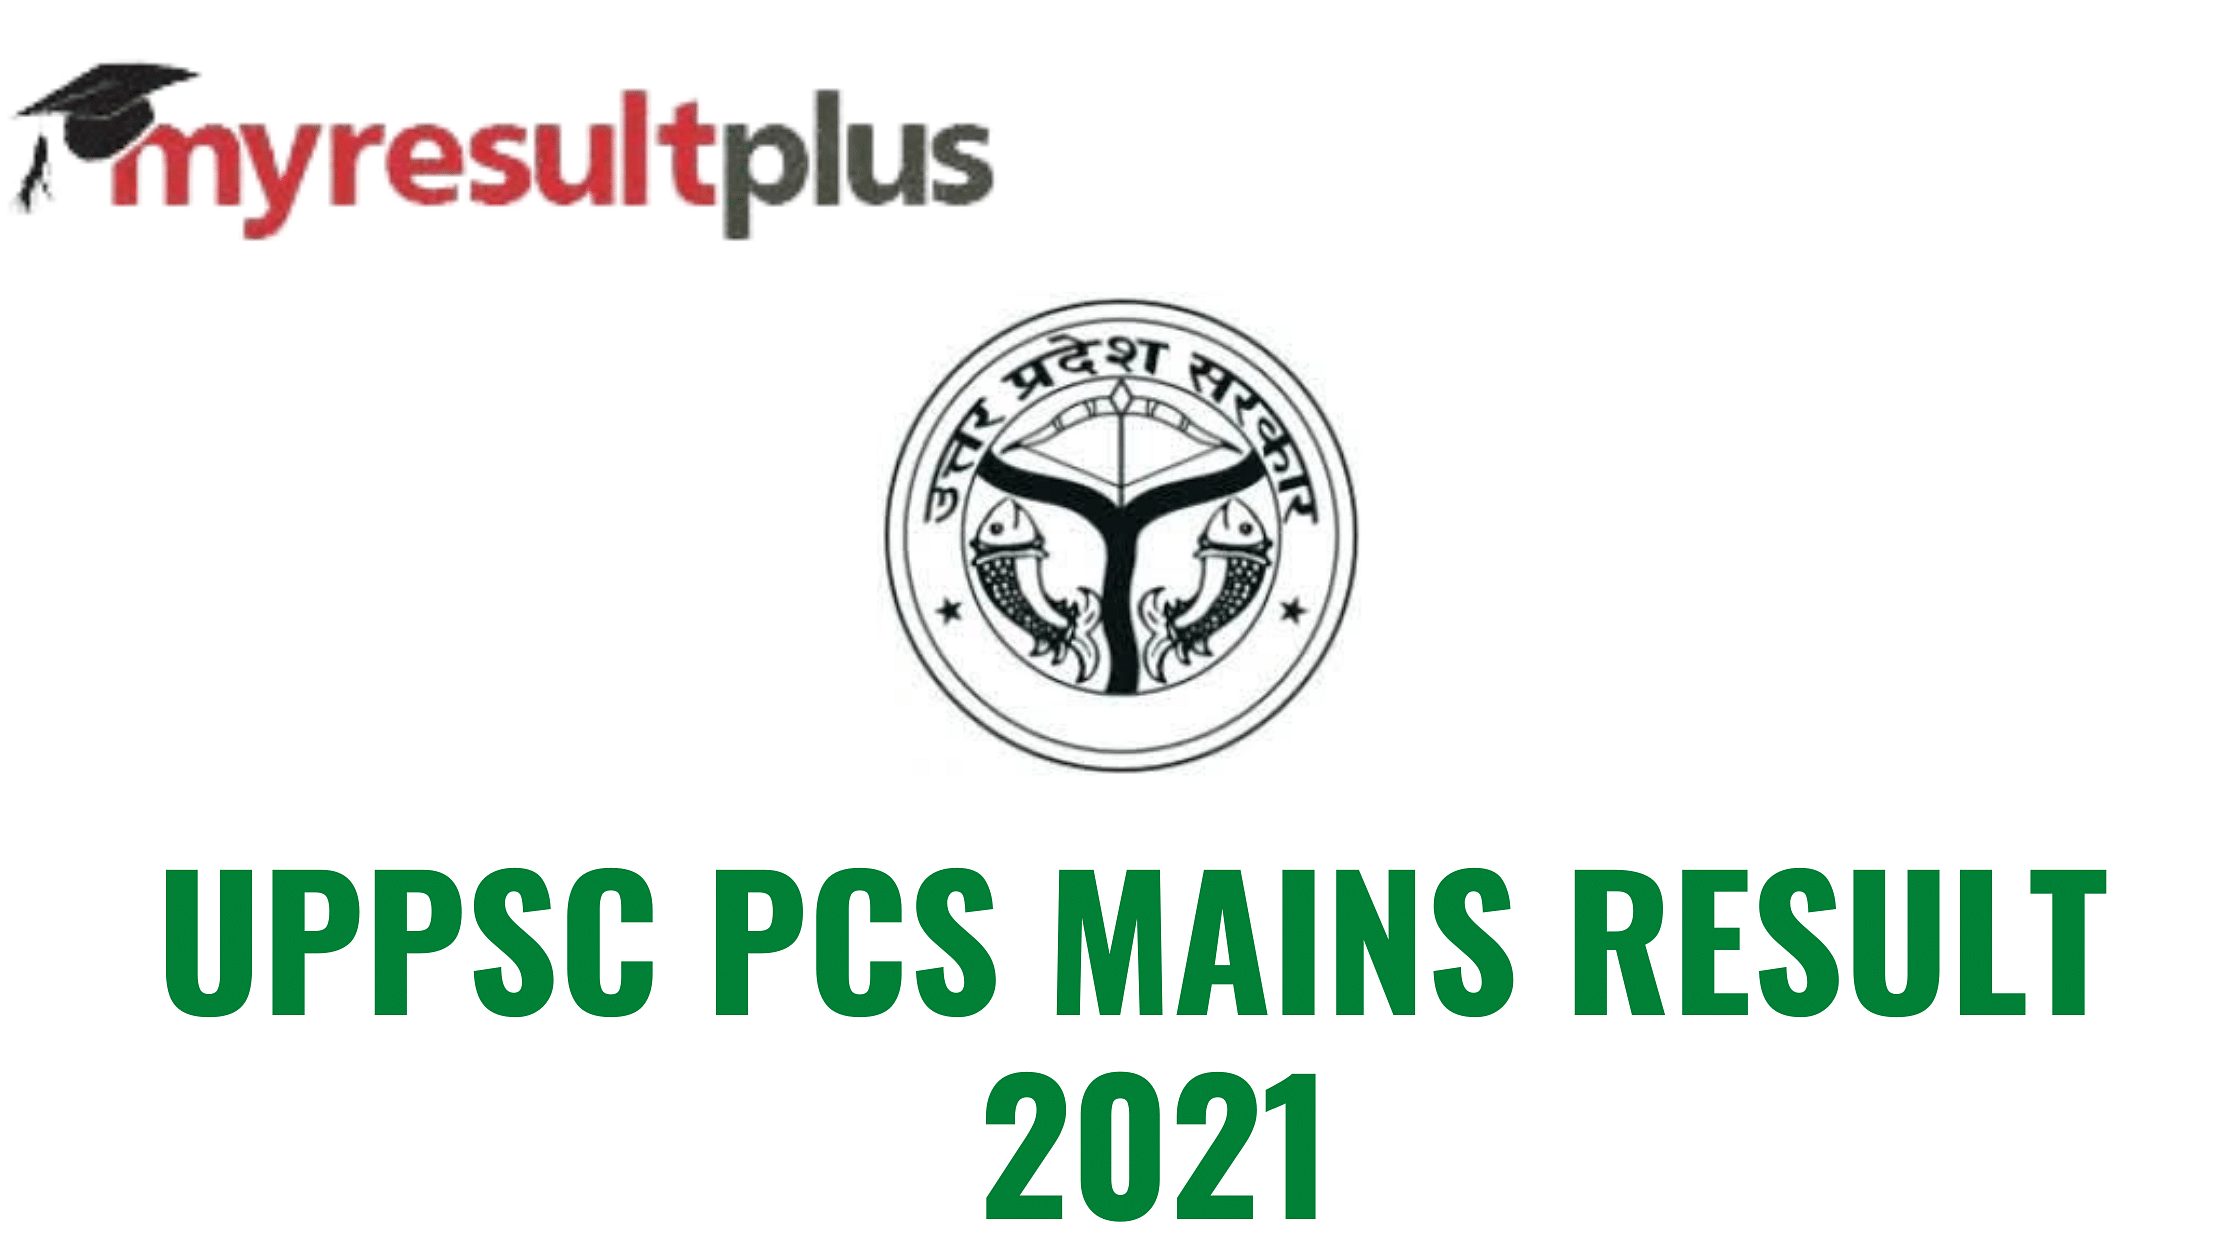 UPPSC PCS Mains Result 2021 Announced, Direct Link to Check Merit List Here